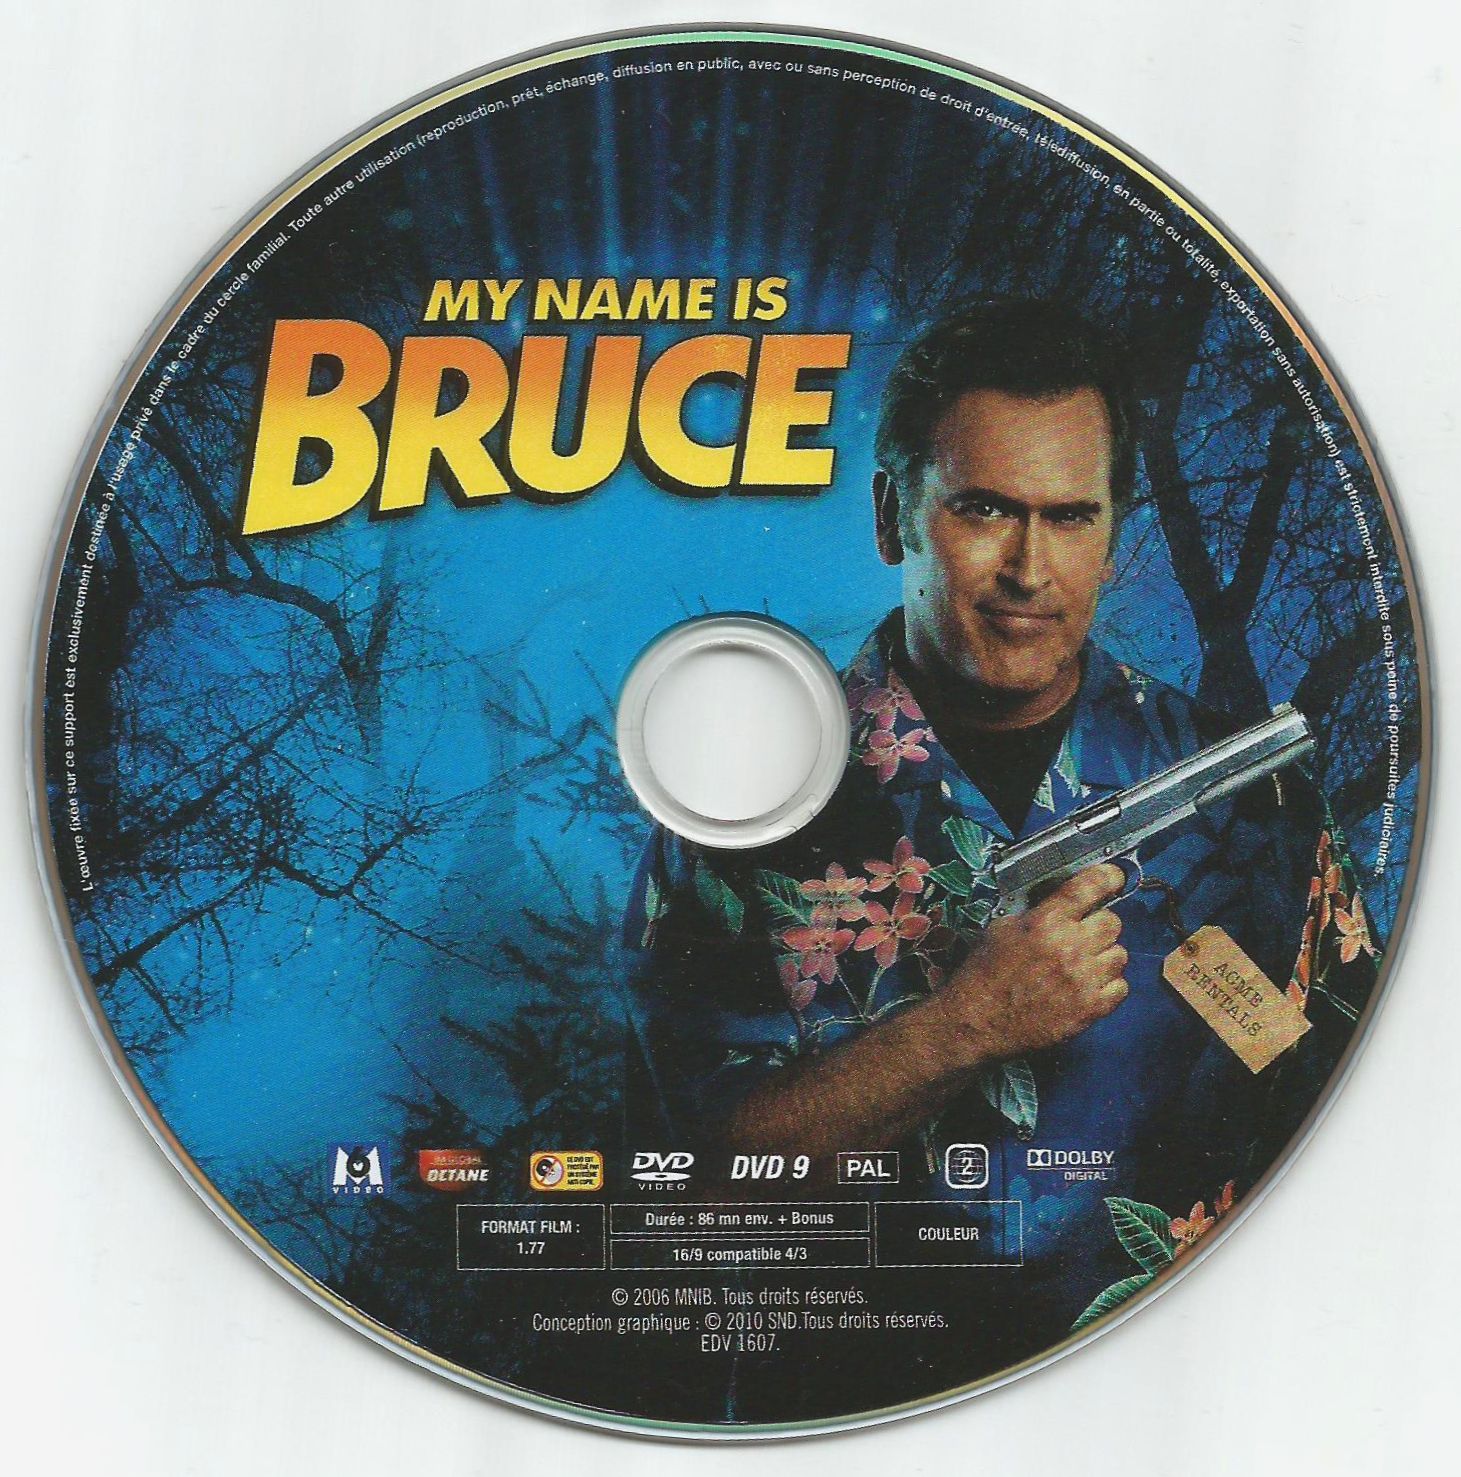 My name is Bruce